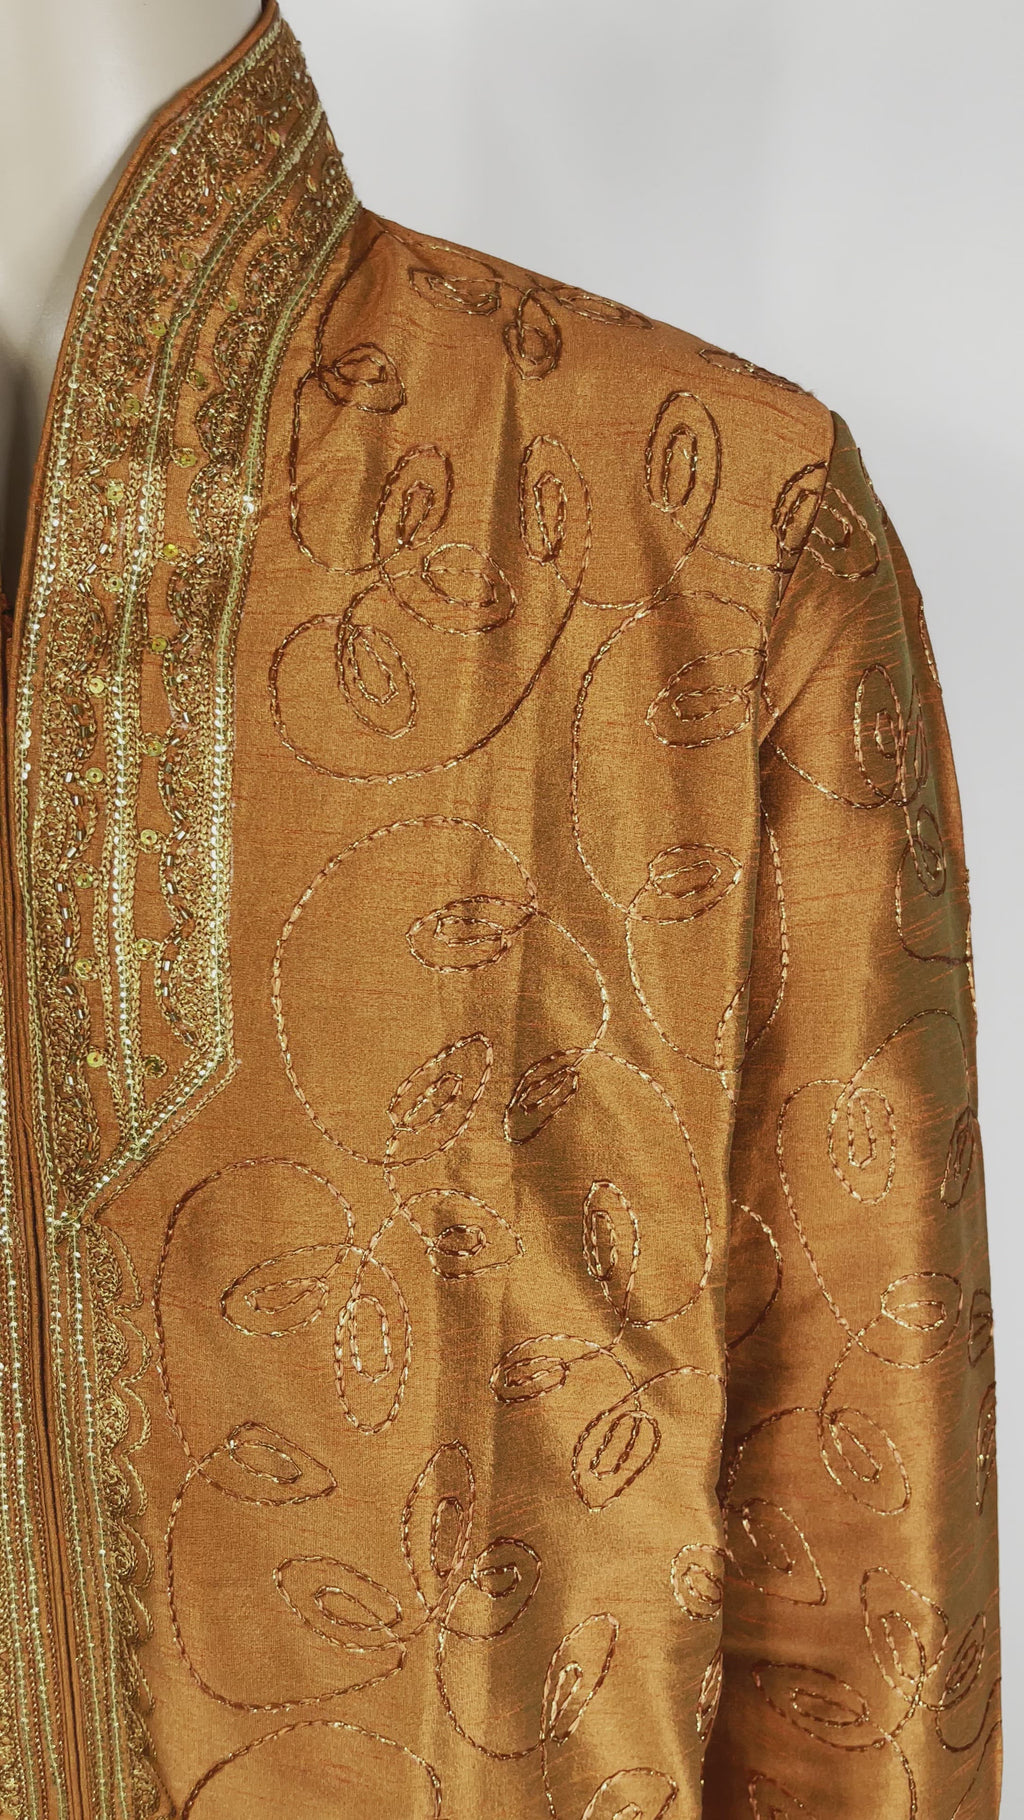 Dark orange silk kurta with gold beads and sequins embroidered & intricate details along the colla